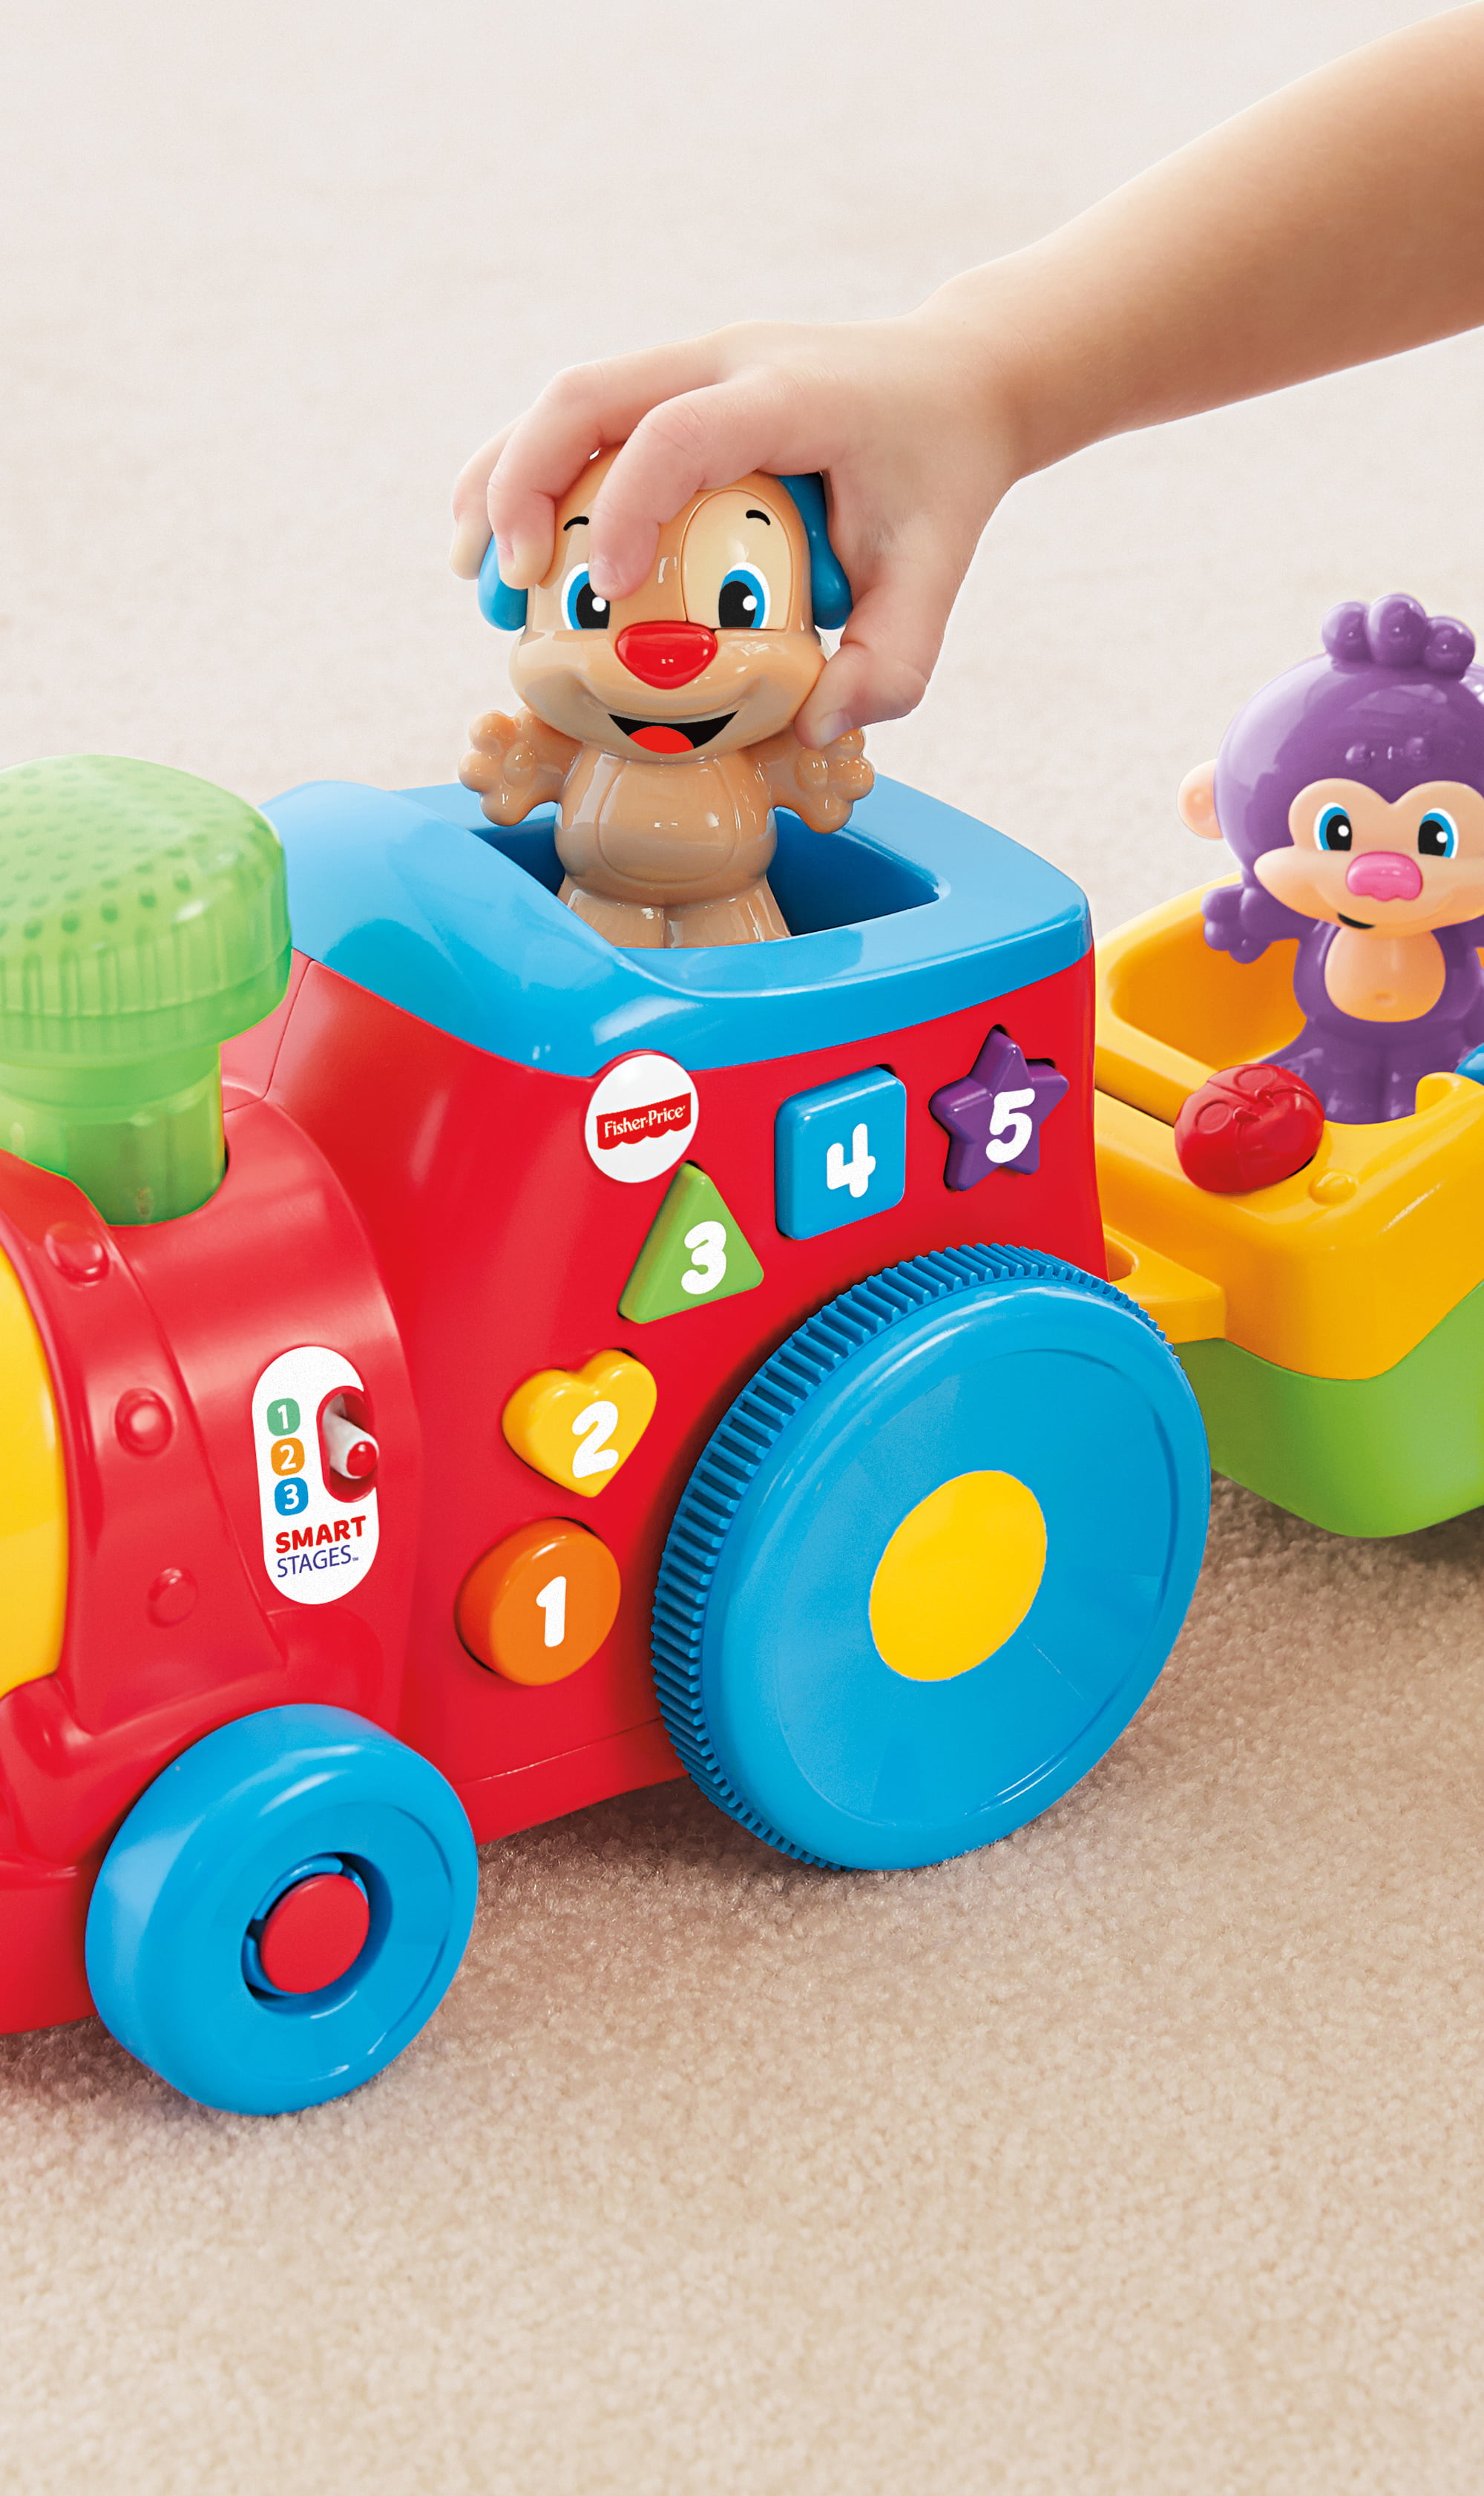 Fisher Price Laugh and Learn Smart Stages Train Wagon Interactive Baby Toy 2014 